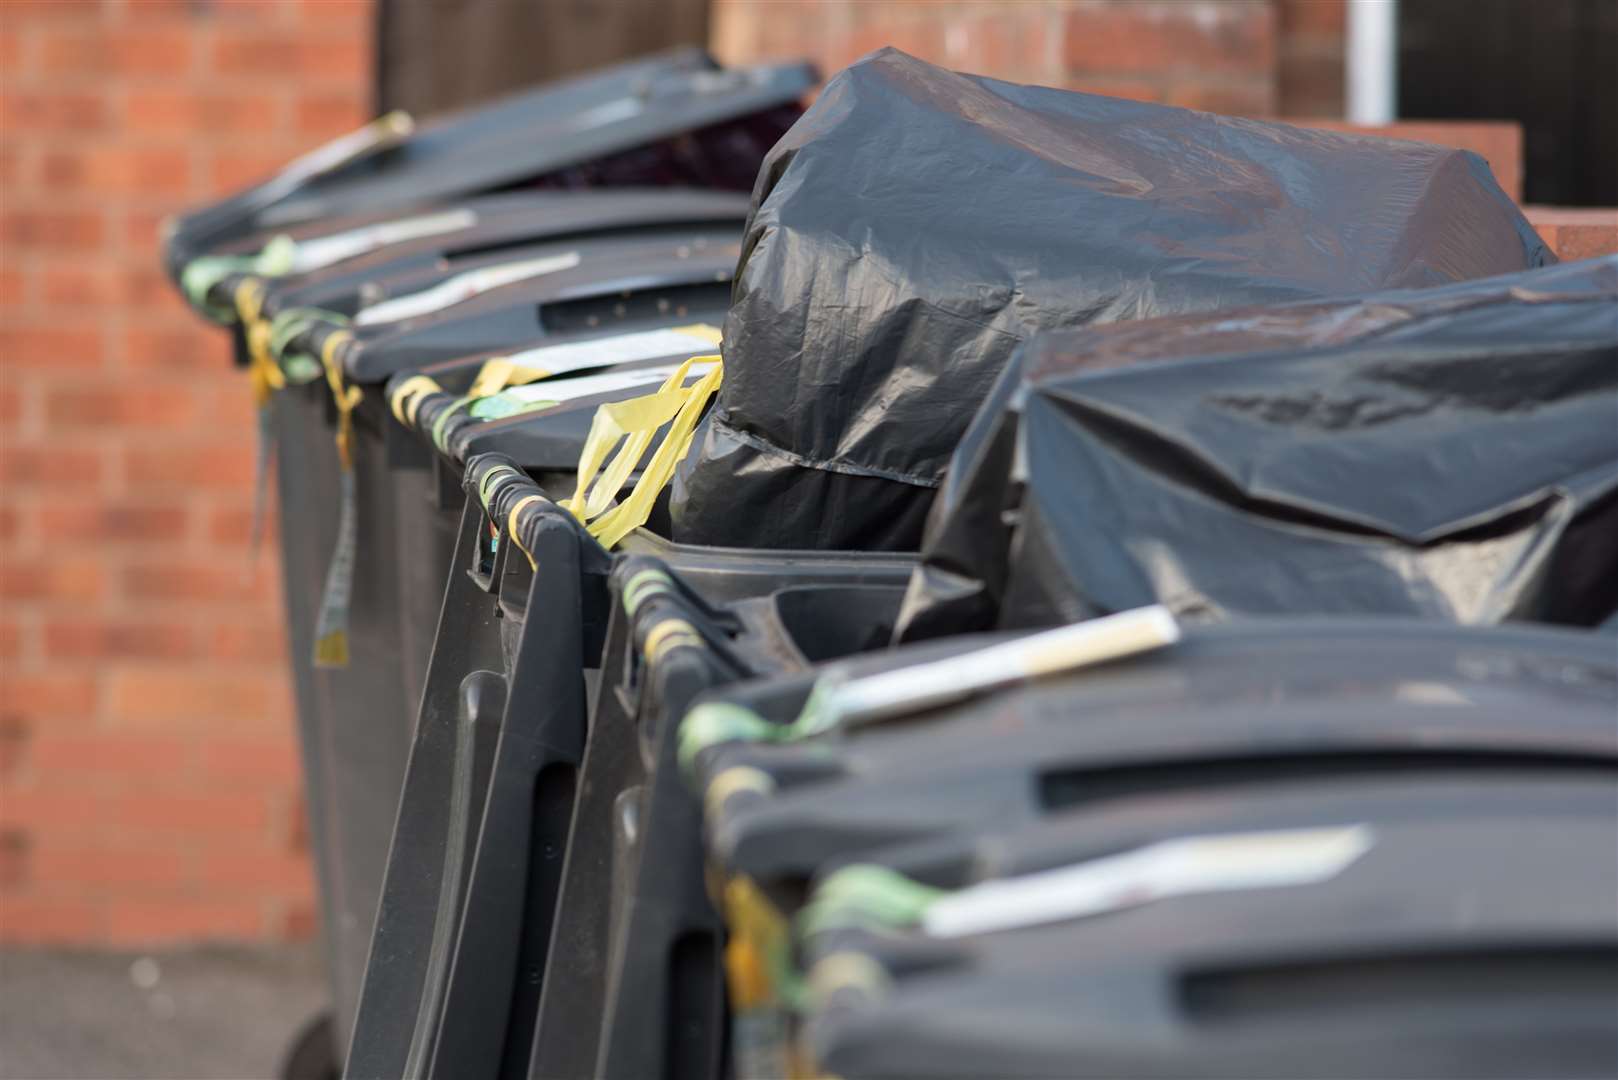 Recent figures from Defra show that the Ashford borough has the highest recycling rate in Kent